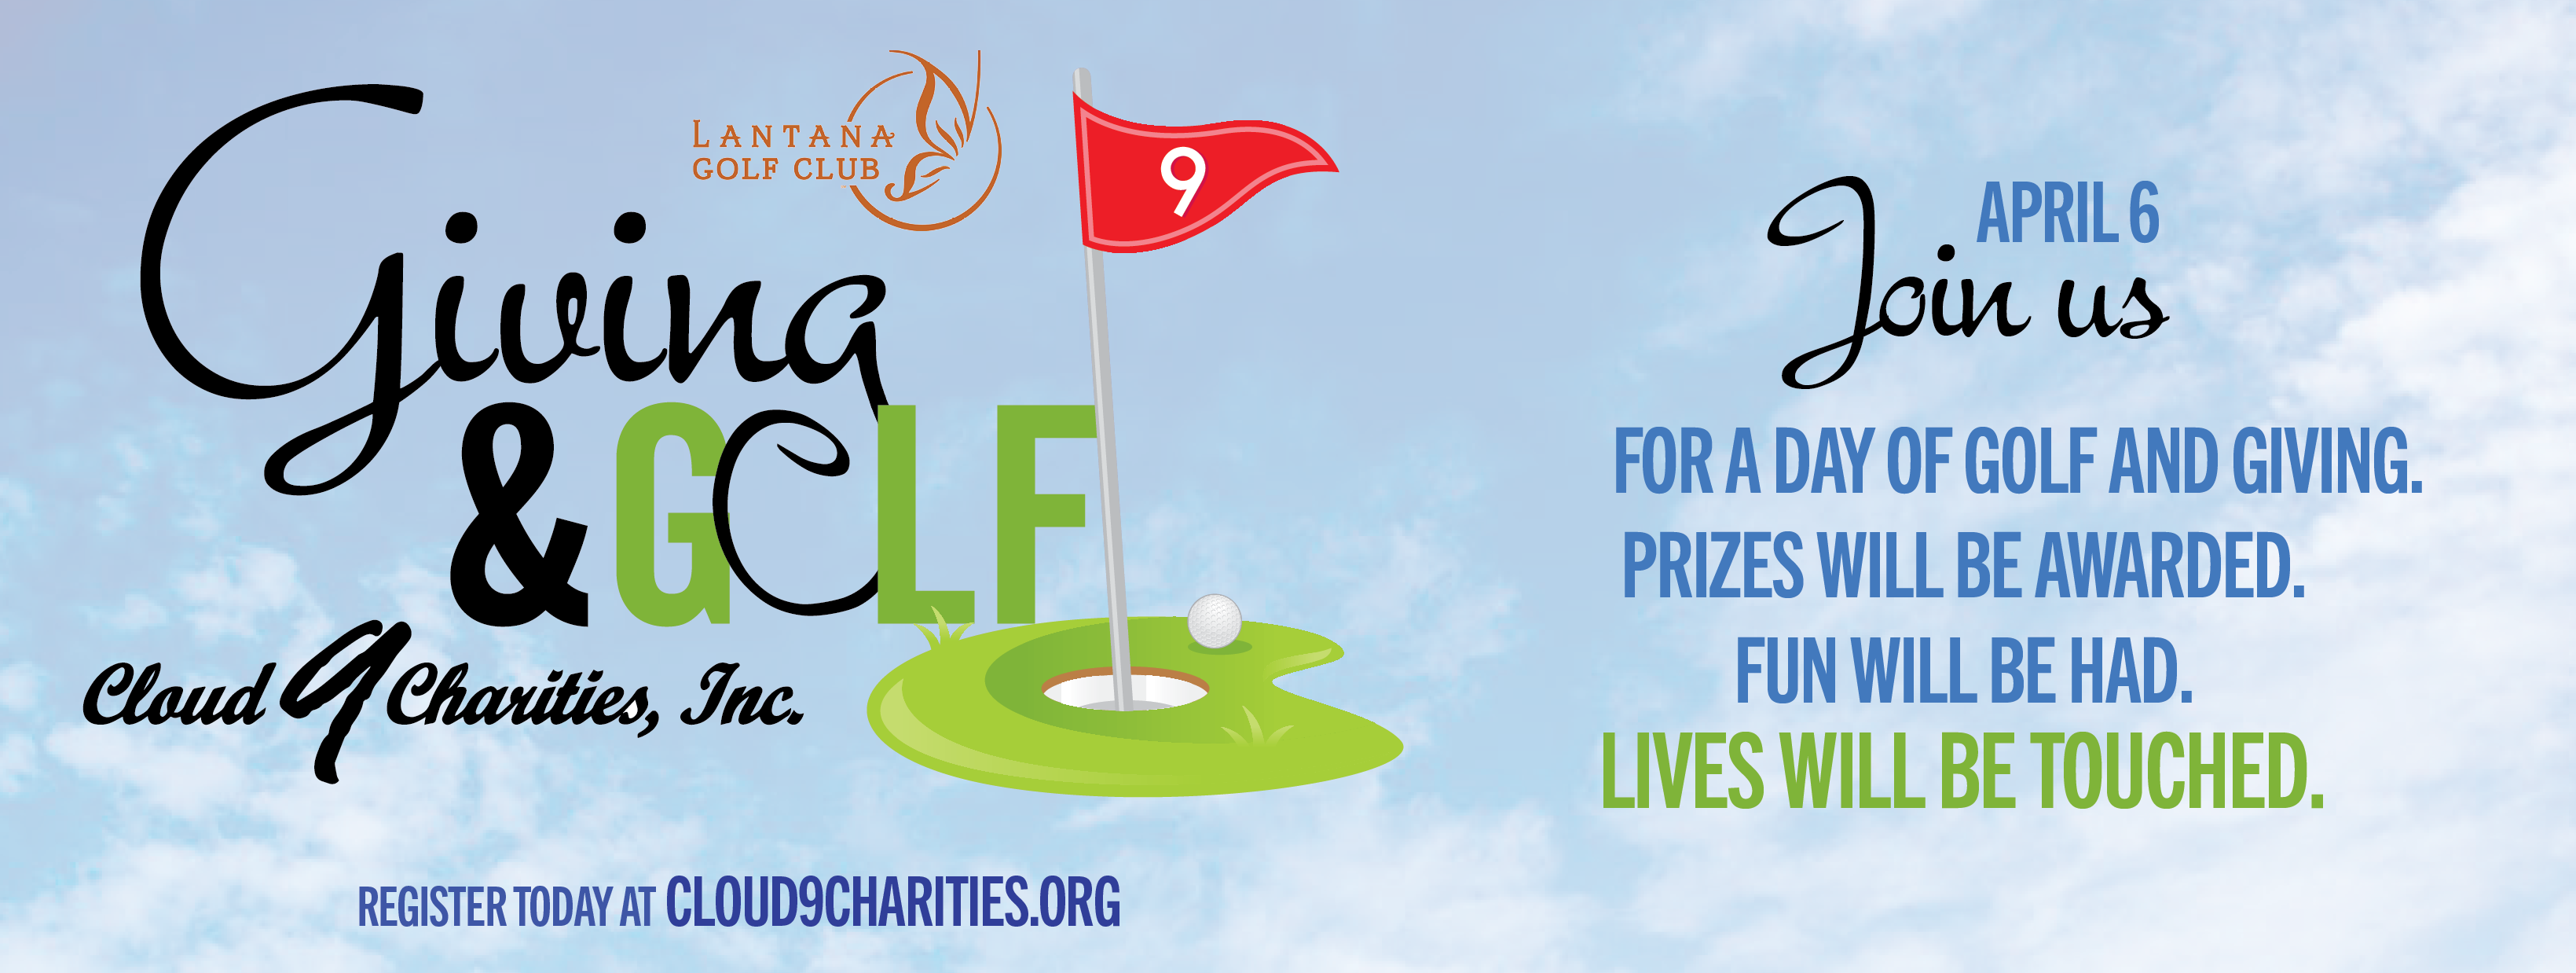 Cloud 9 Charities Giving and Golf 2021